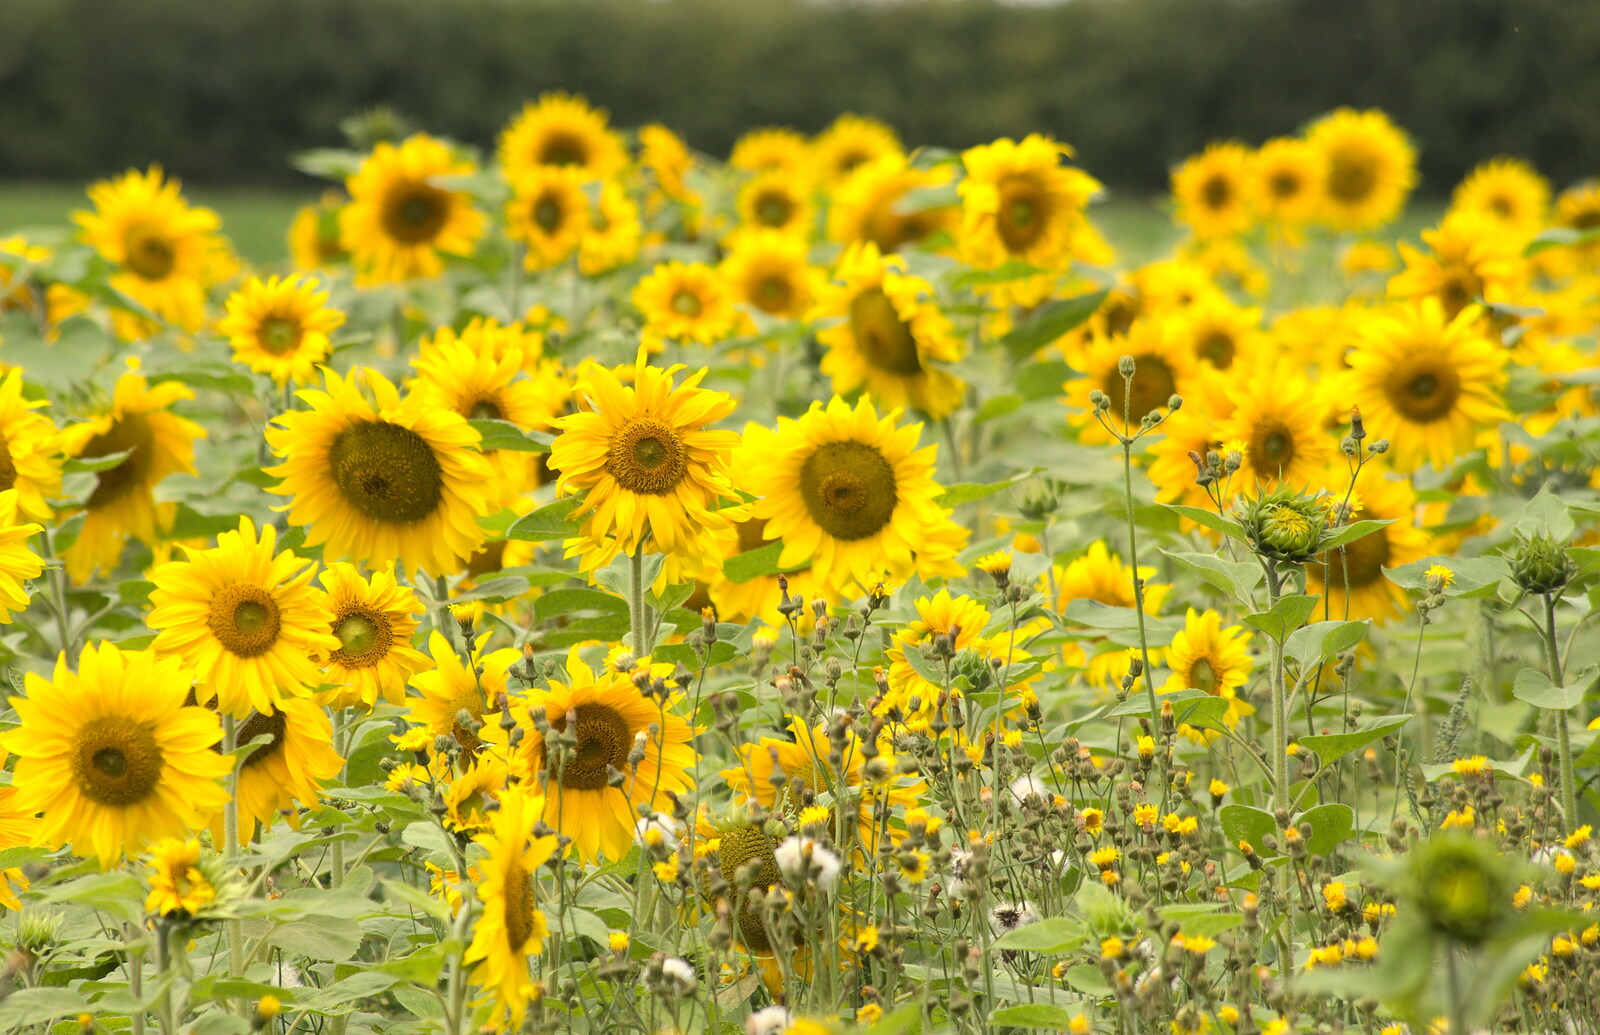 Sunflowers in a field from A Race For Life, The Park, Diss, Norfolk - 16th August 2015